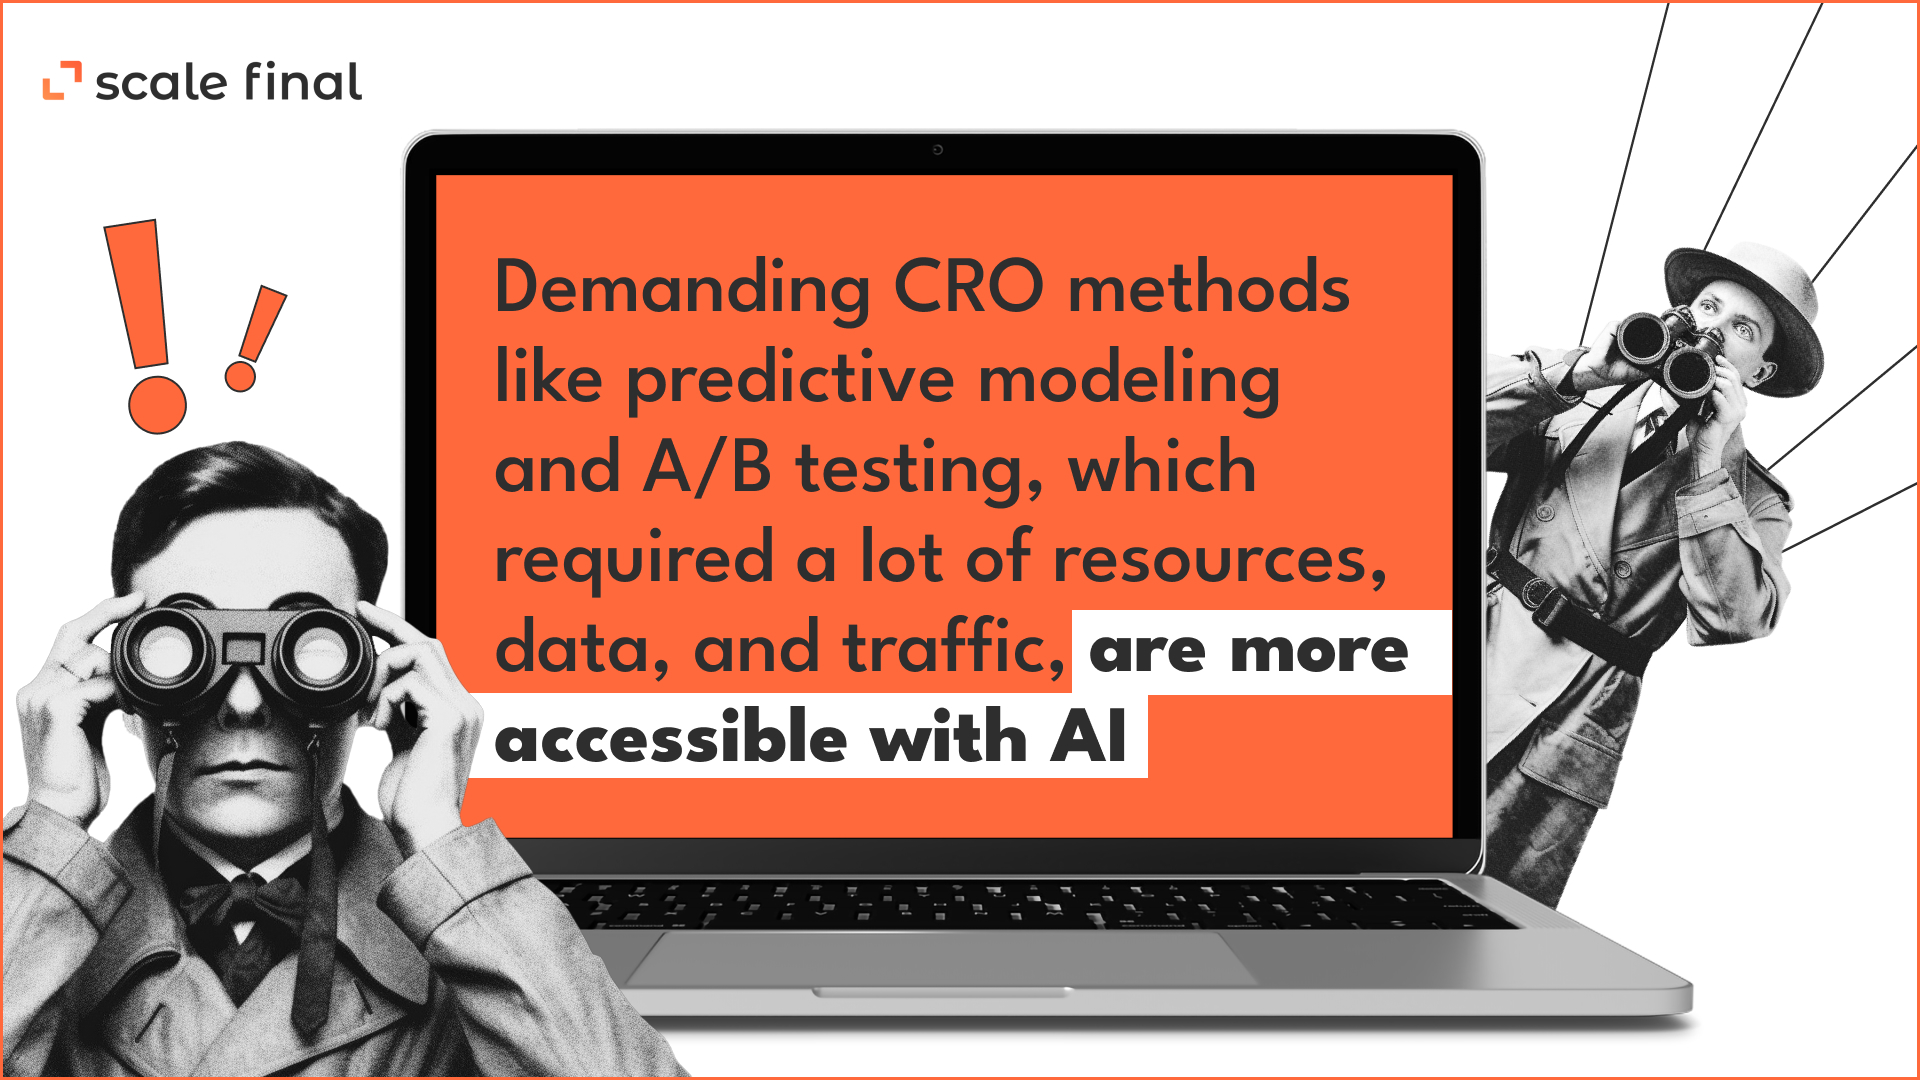 Demanding CRO methods like predictive modeling and A/B testing, which required a lot of resources, data, and traffic, are more accessible with AI.